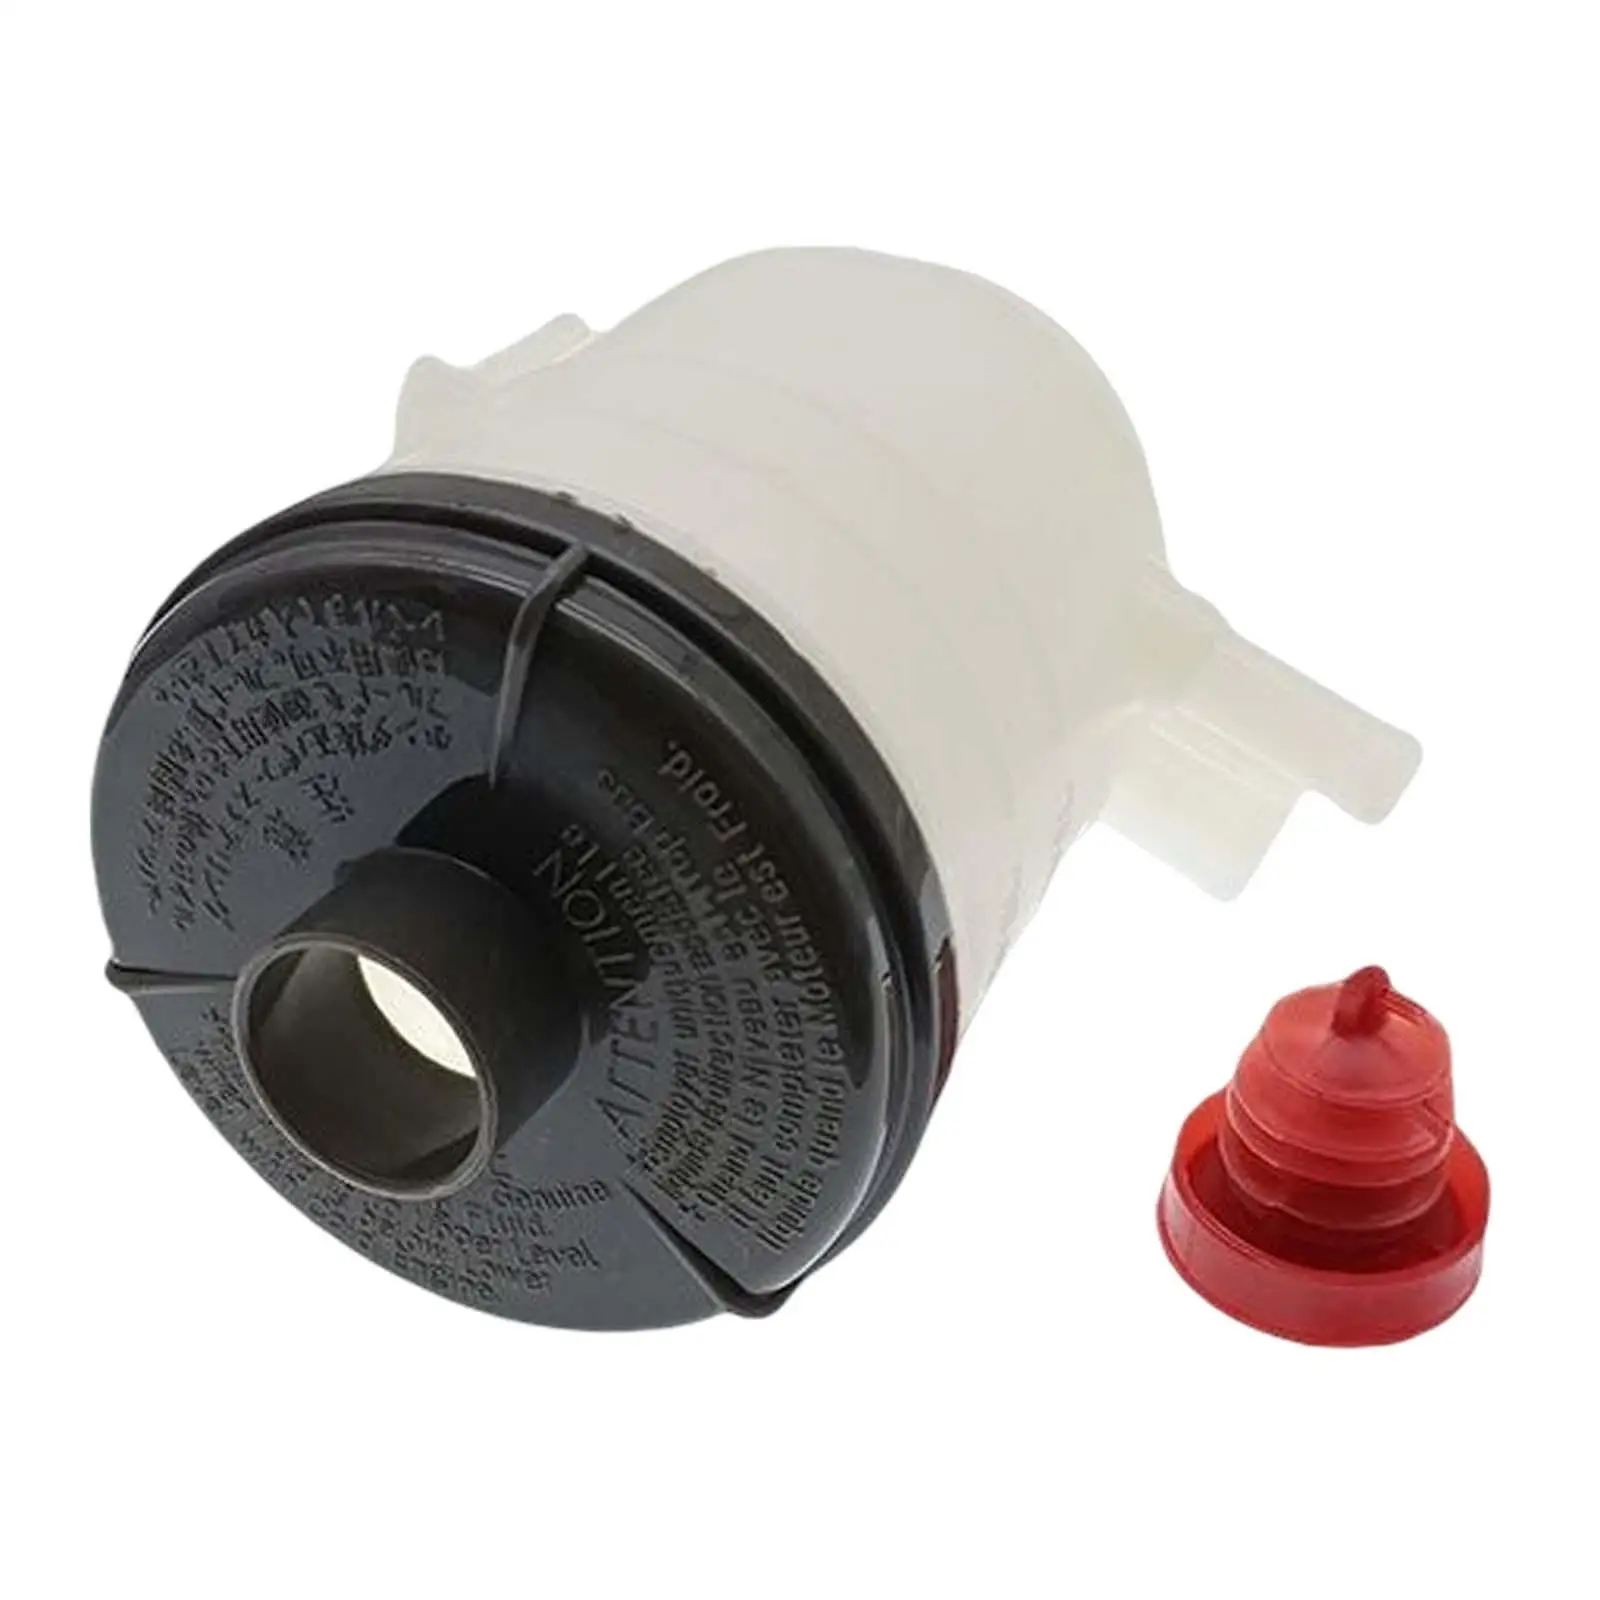 Booster Pump Oil Cup Parts Replacement Accessory Durable Practical Power Steering Pump Reservoir for Honda Accord 98-02